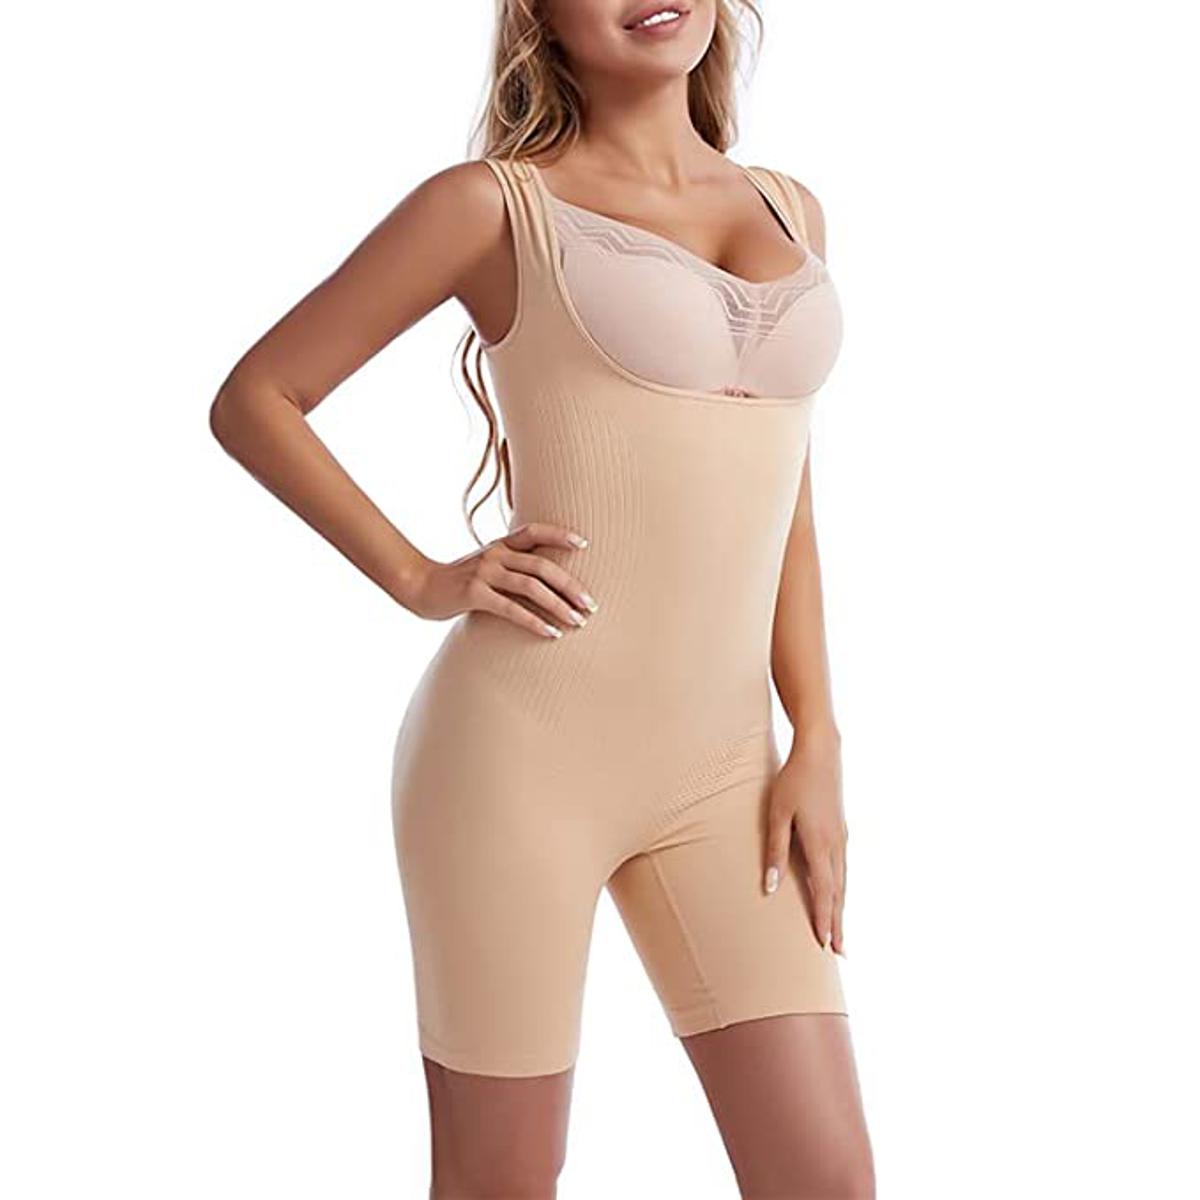 TZsecrets Women Full Body Shaper Cotton Spandex Blend Body Shaper wear for  Thighs, Back, Tummy - Stretchable Tummy Control with Full Body Shaping and  Slimming (Beige)